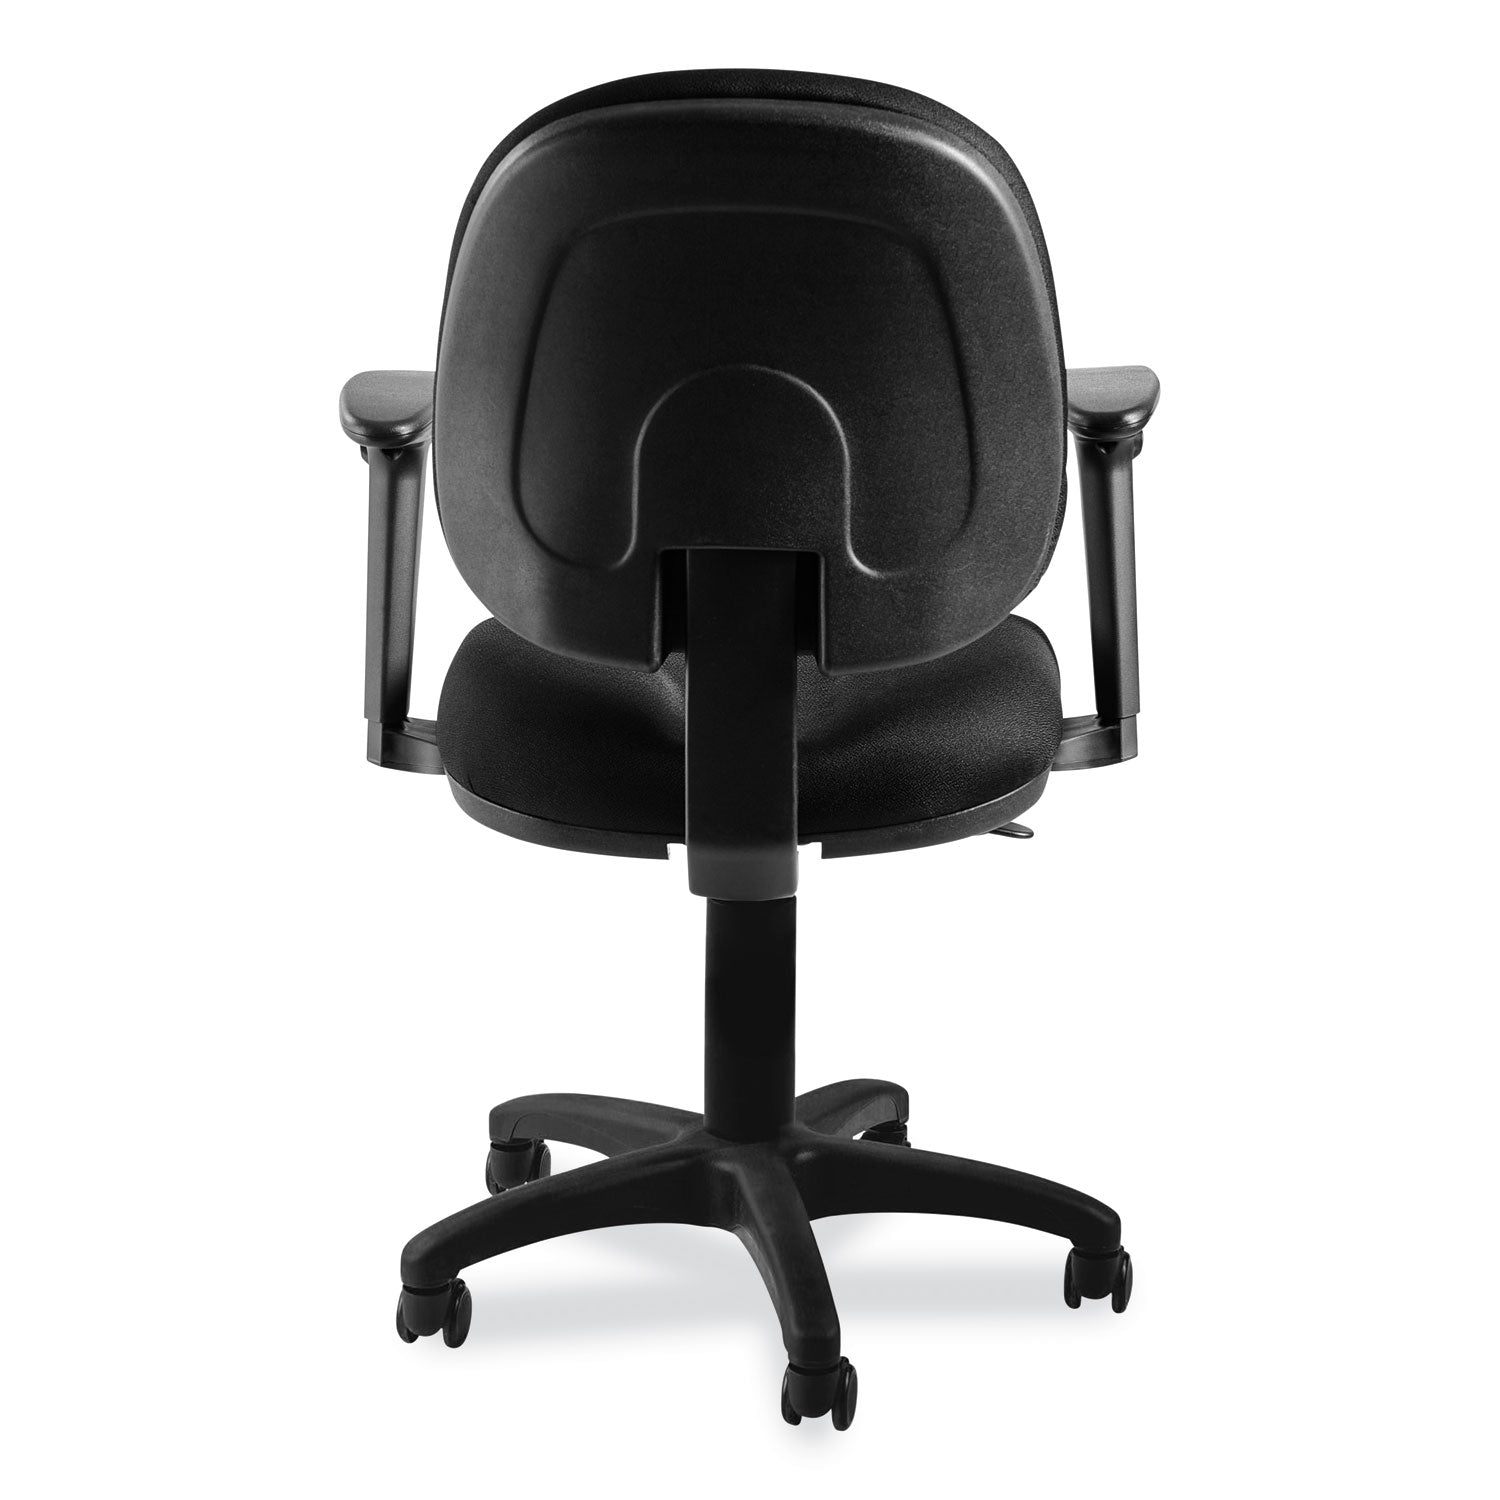 comfort-task-chair-with-arms-supports-up-to-300lb-19-to-23-seat-height-black-seat-back-black-baseships-in-1-3-bus-days_npsctca - 4